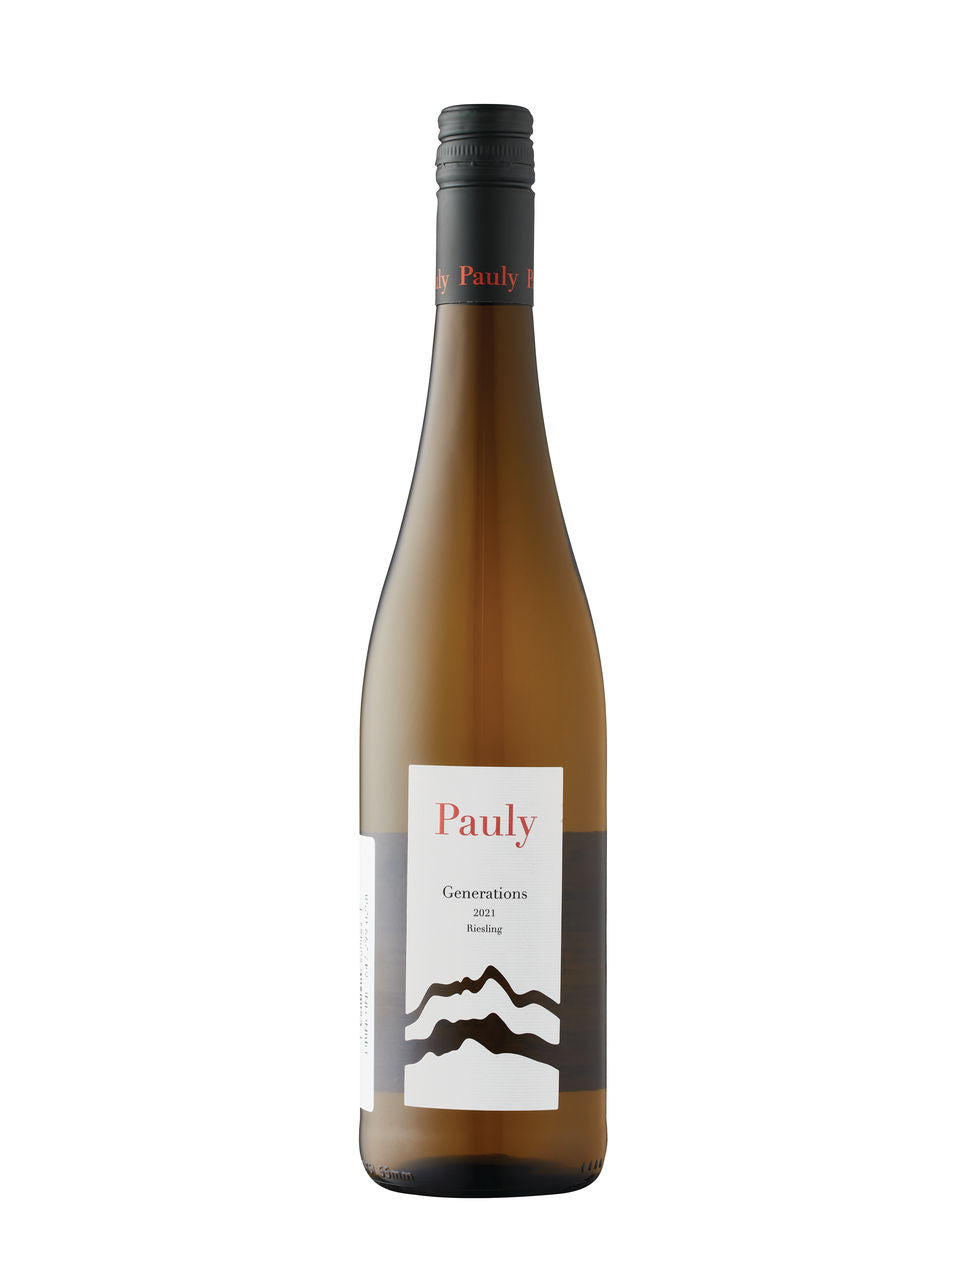 Pauly Generations Riesling 2021 750 mL bottle VINTAGES